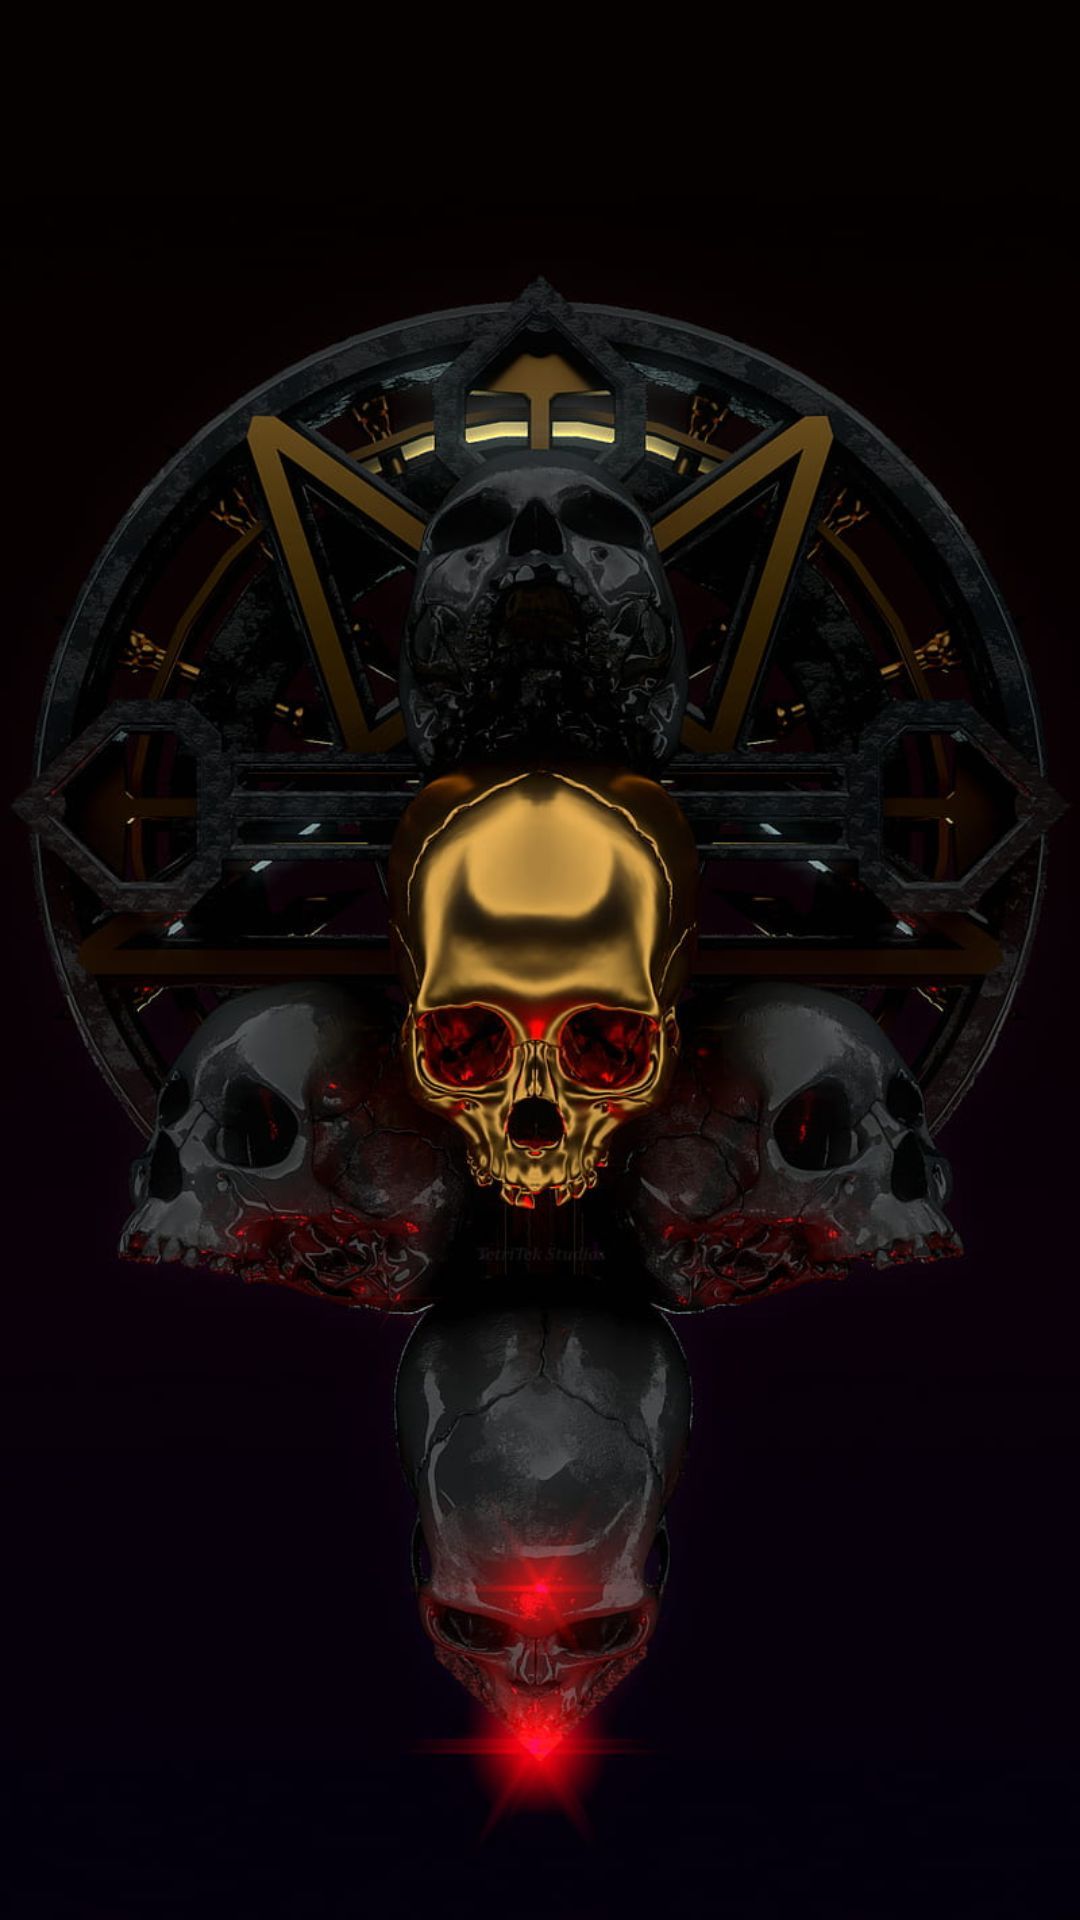 IPhone wallpaper with a gold skull surrounded by black skulls - Gothic